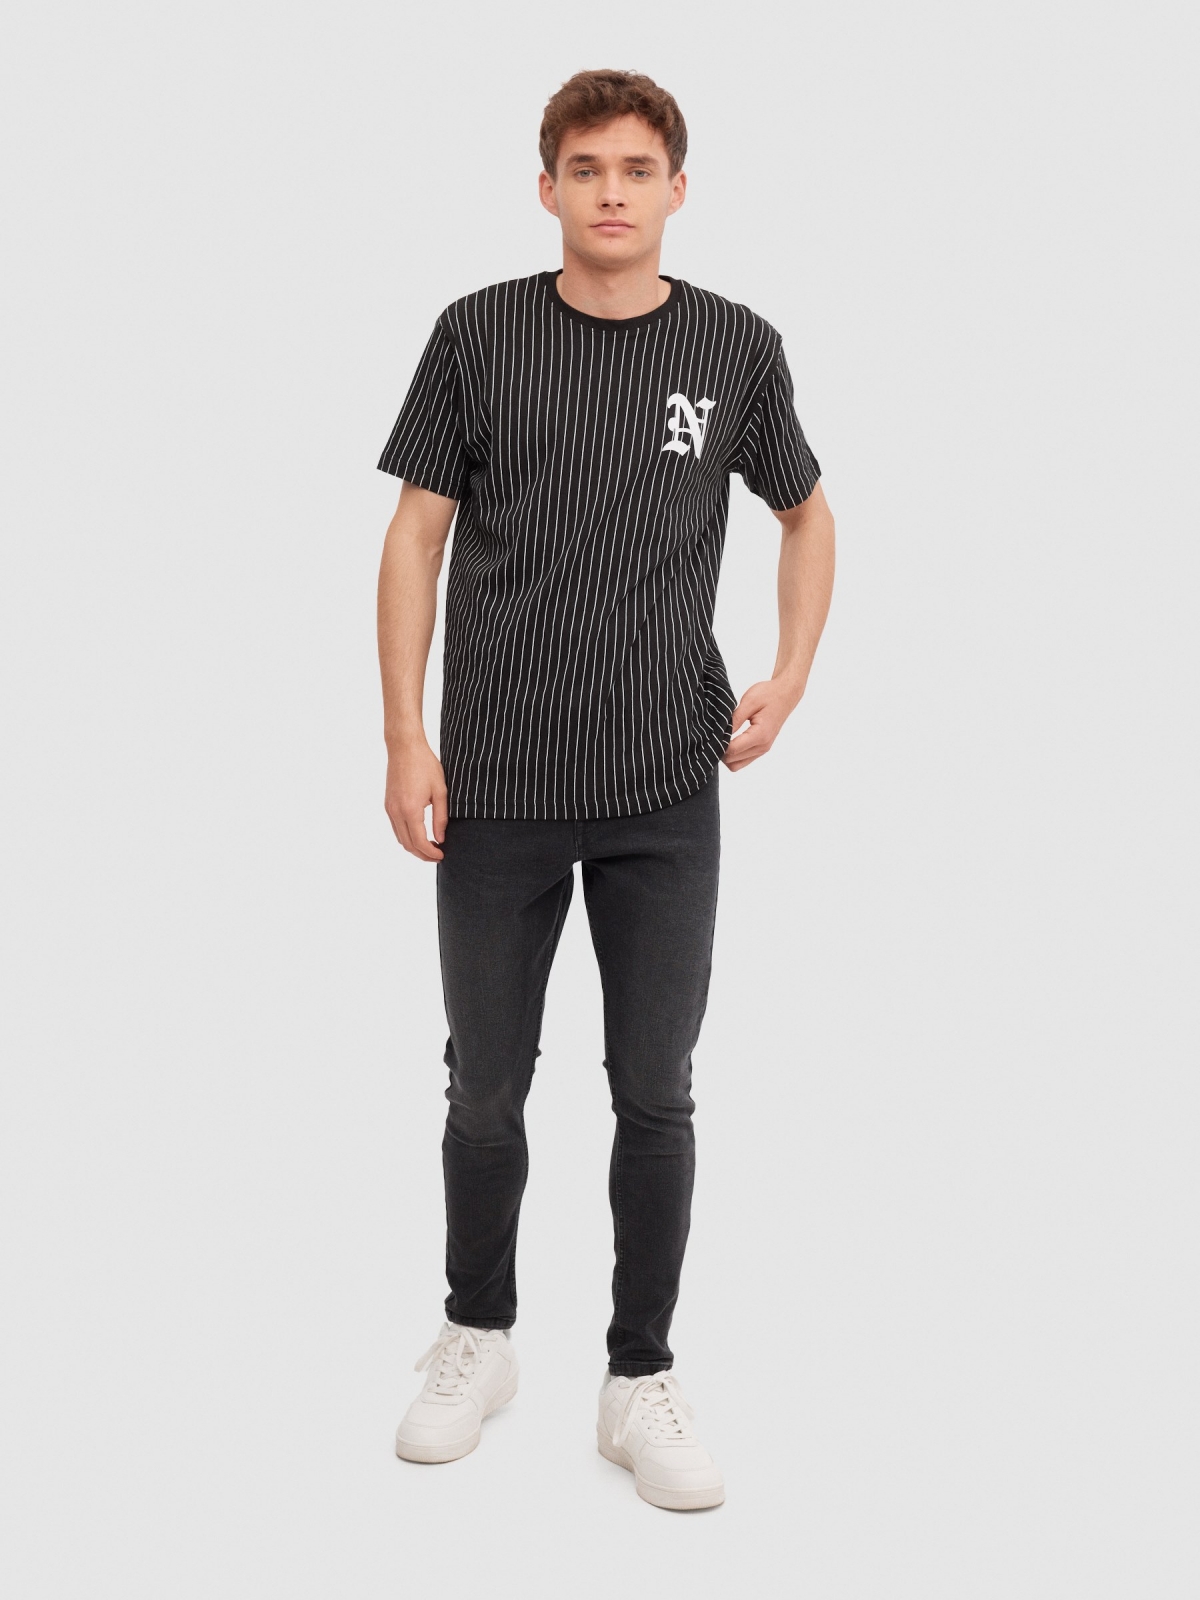 Vertical striped T-shirt black front view